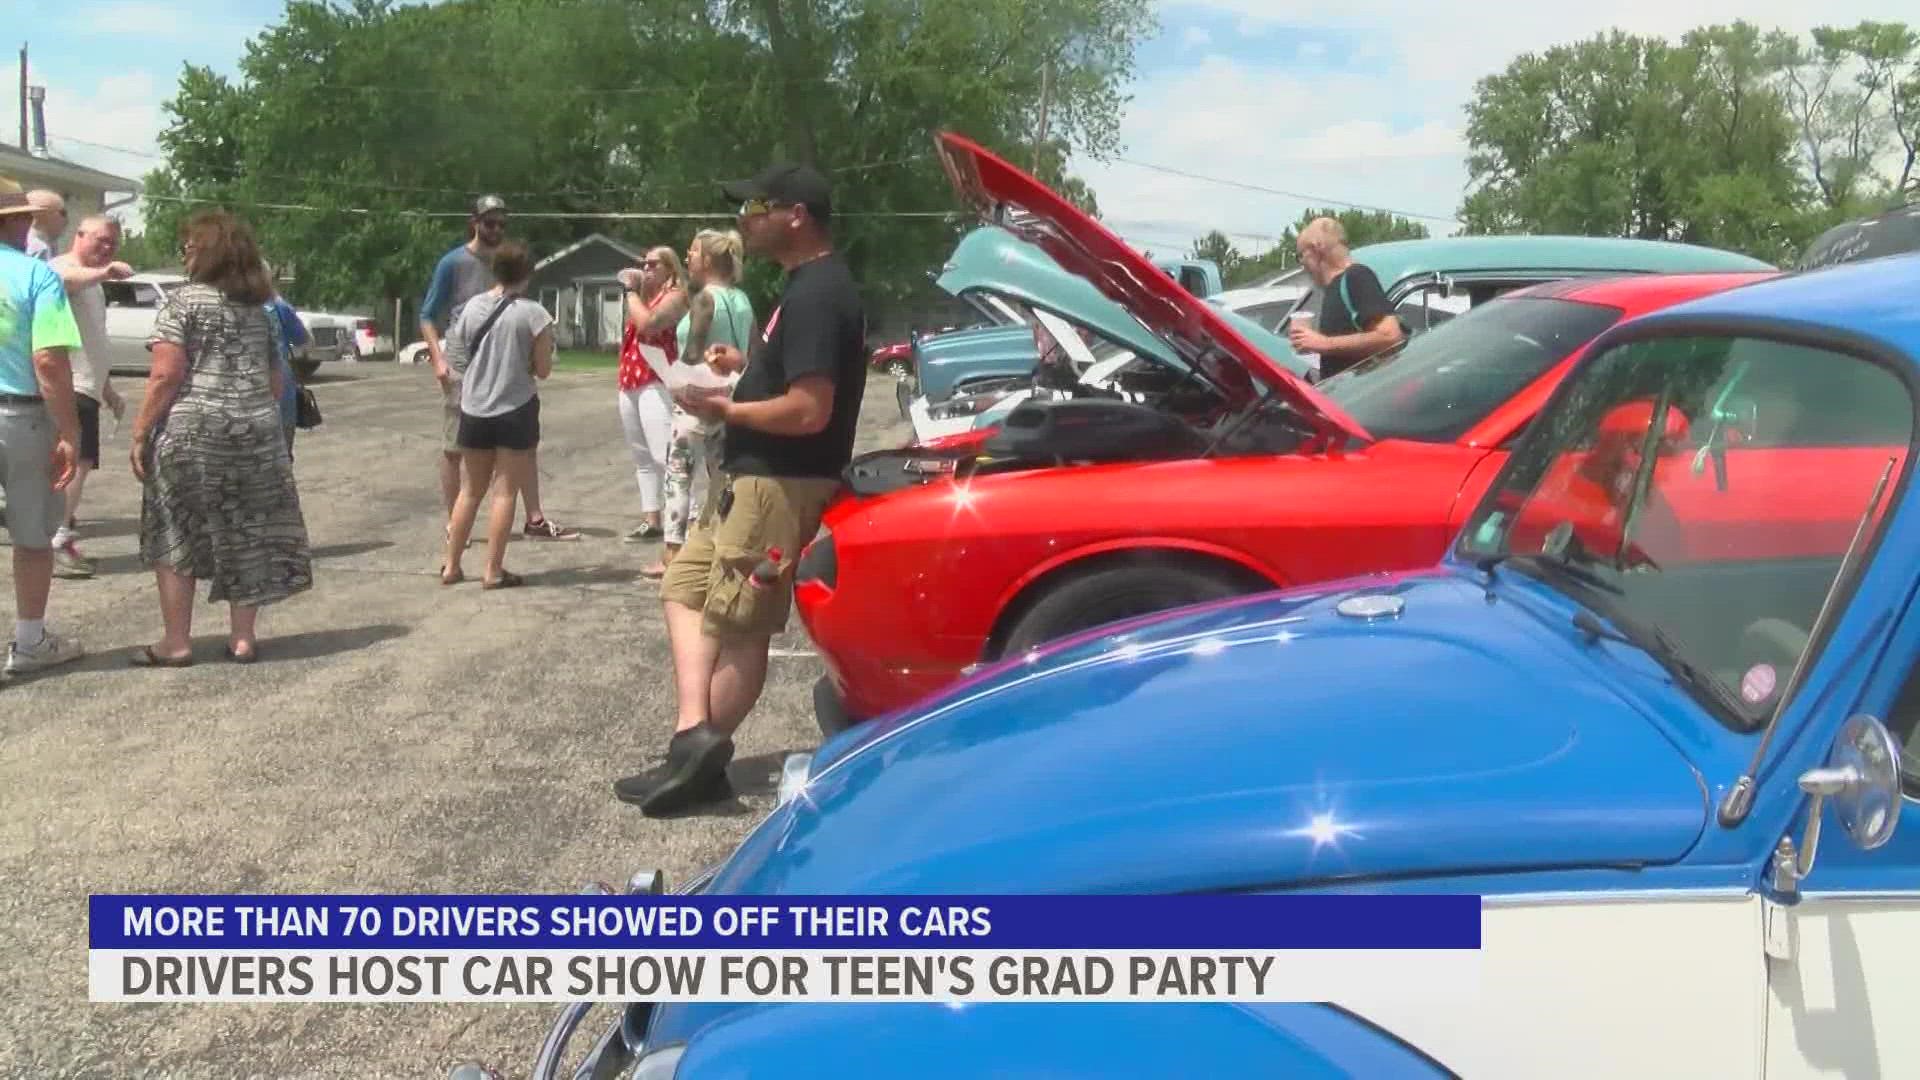 More than 70 drivers showed off their cars at the event.